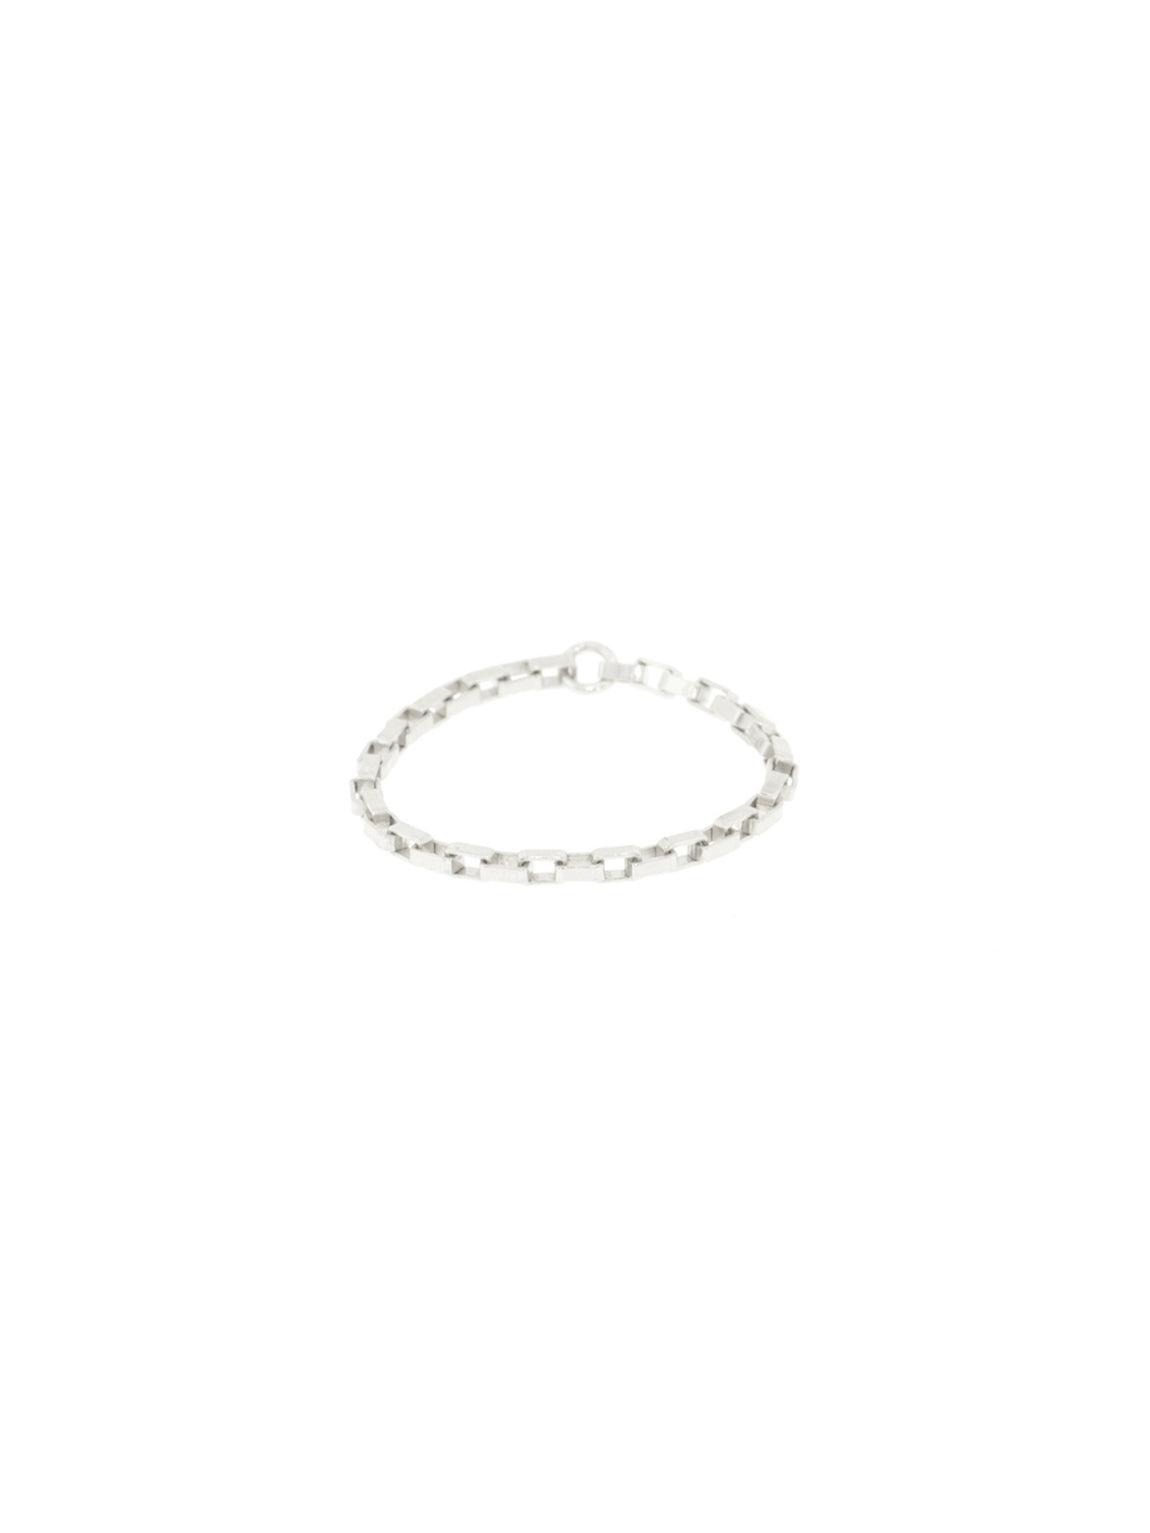 Boxy chain | 925 Sterling Silver